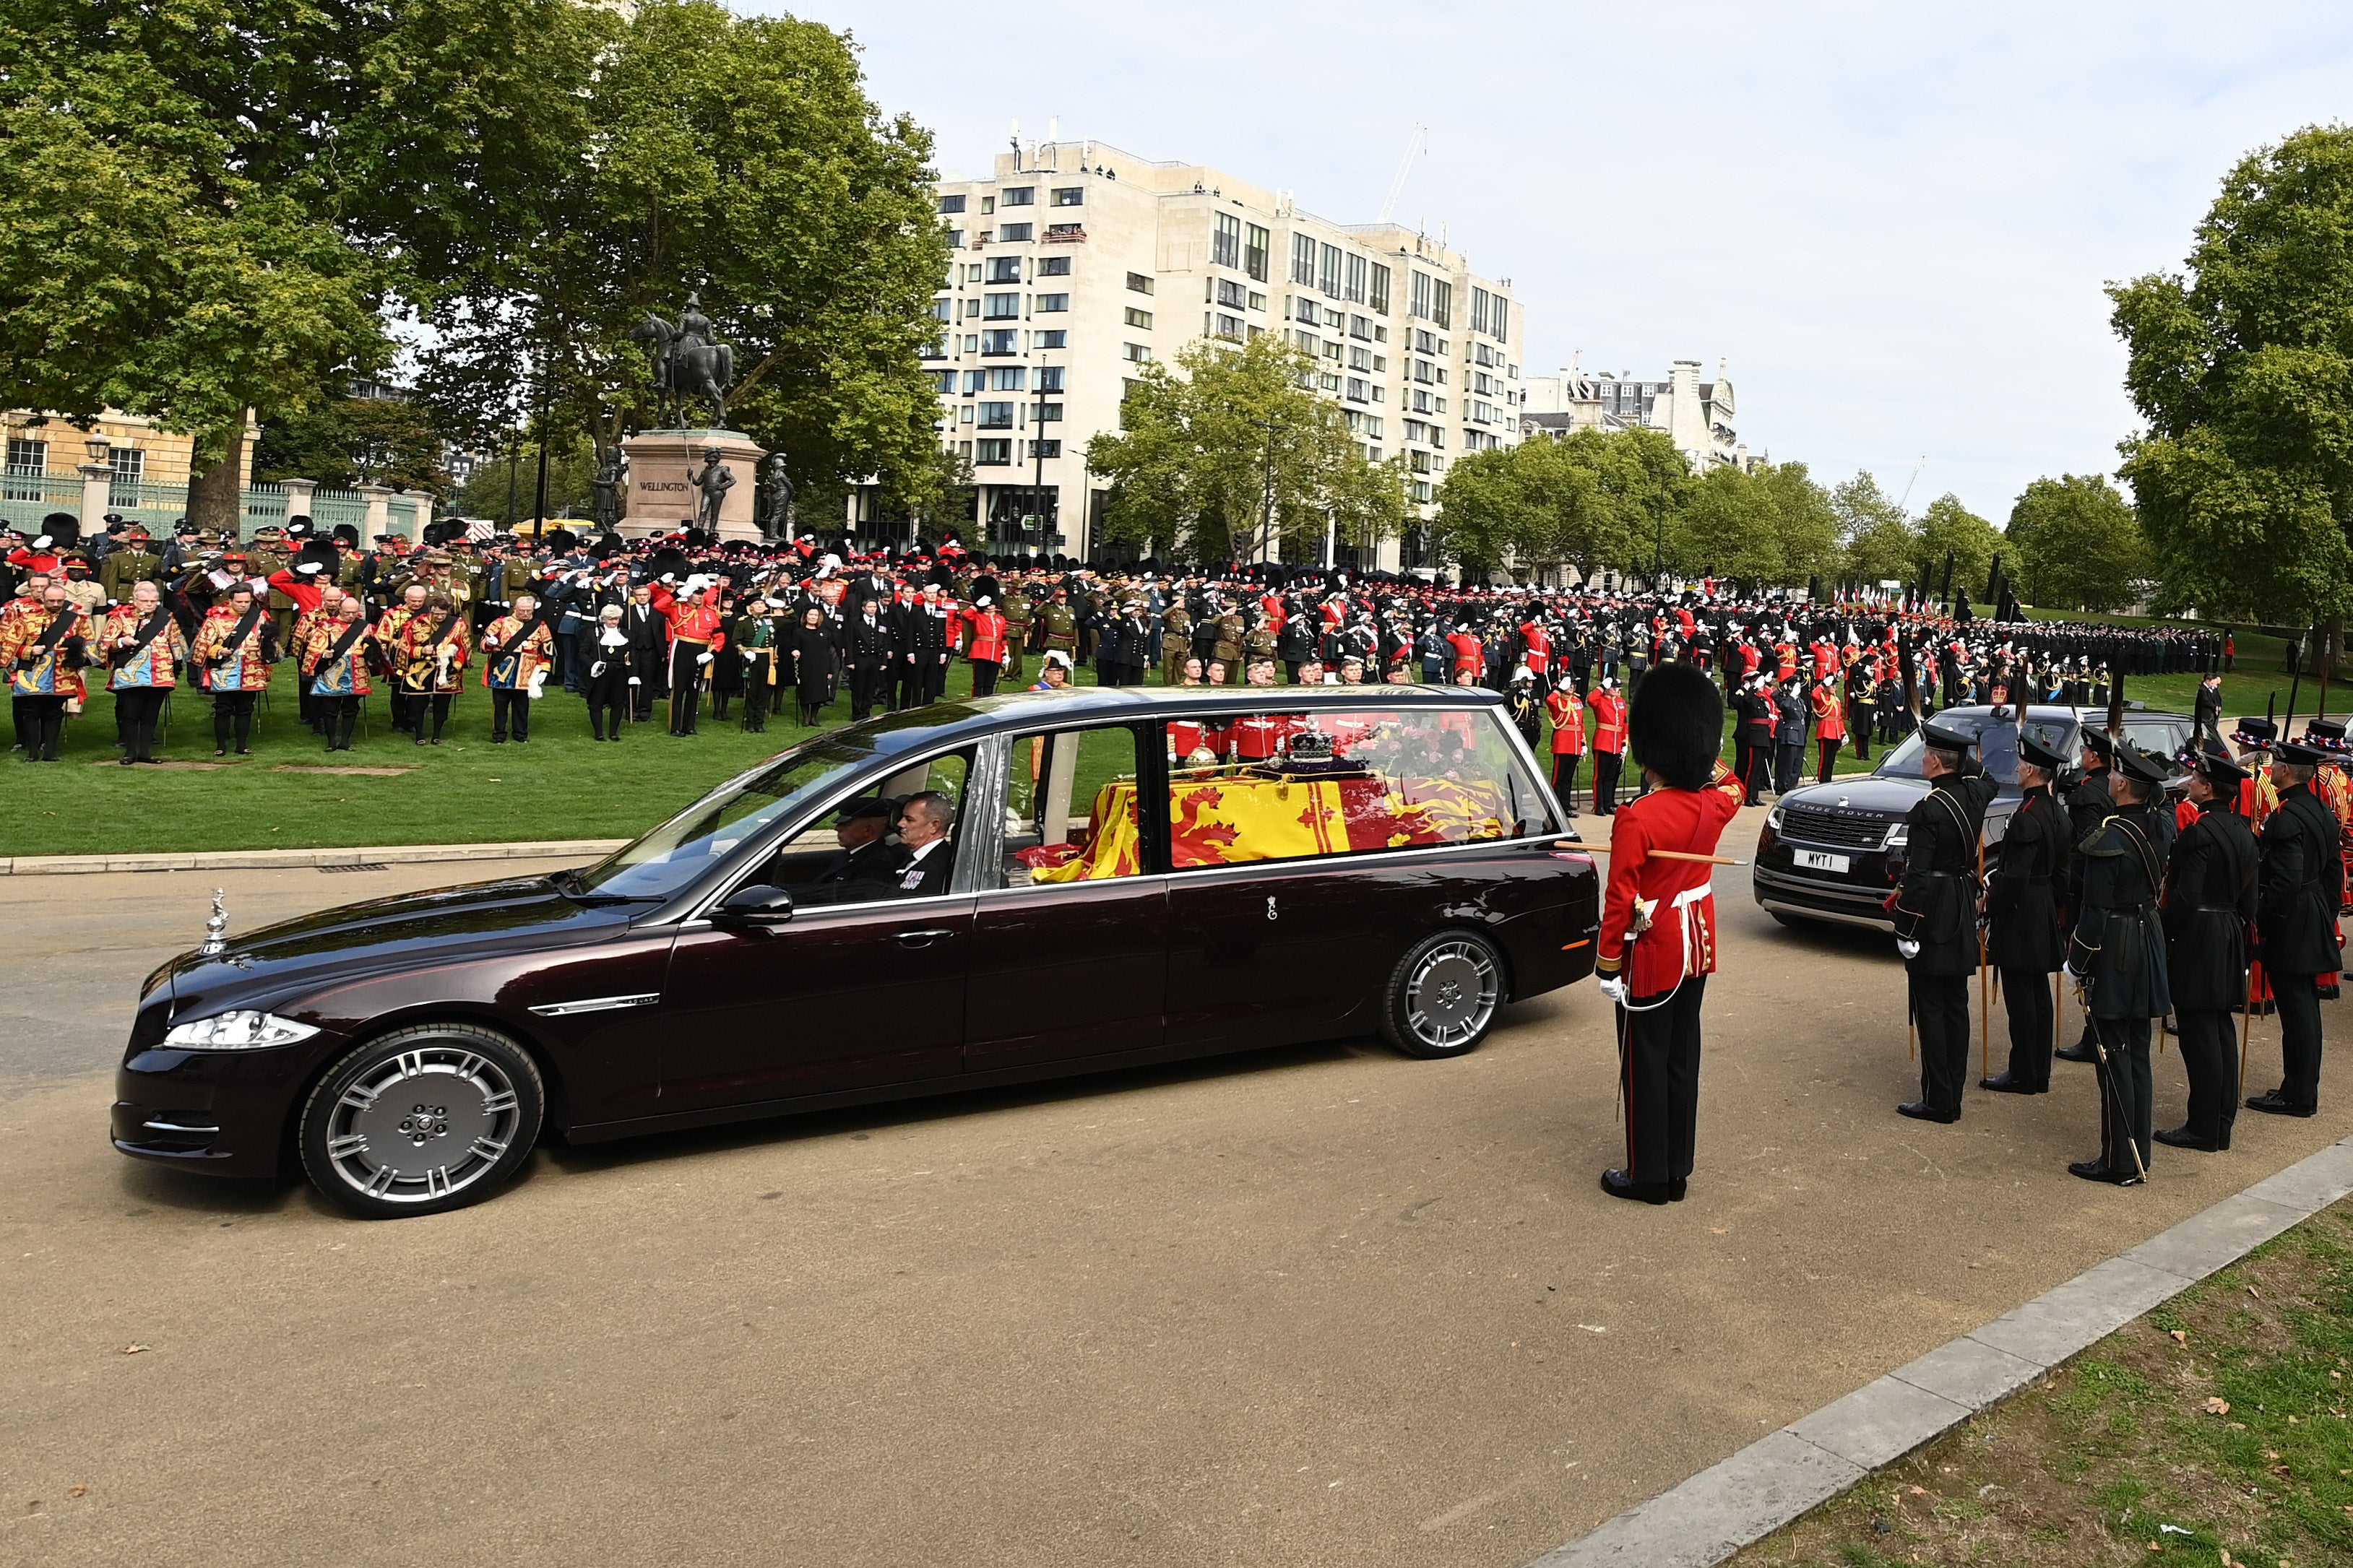 The Royal Hearse carries the Queen’s coffin away from Wellington Arch before heading to Windsor